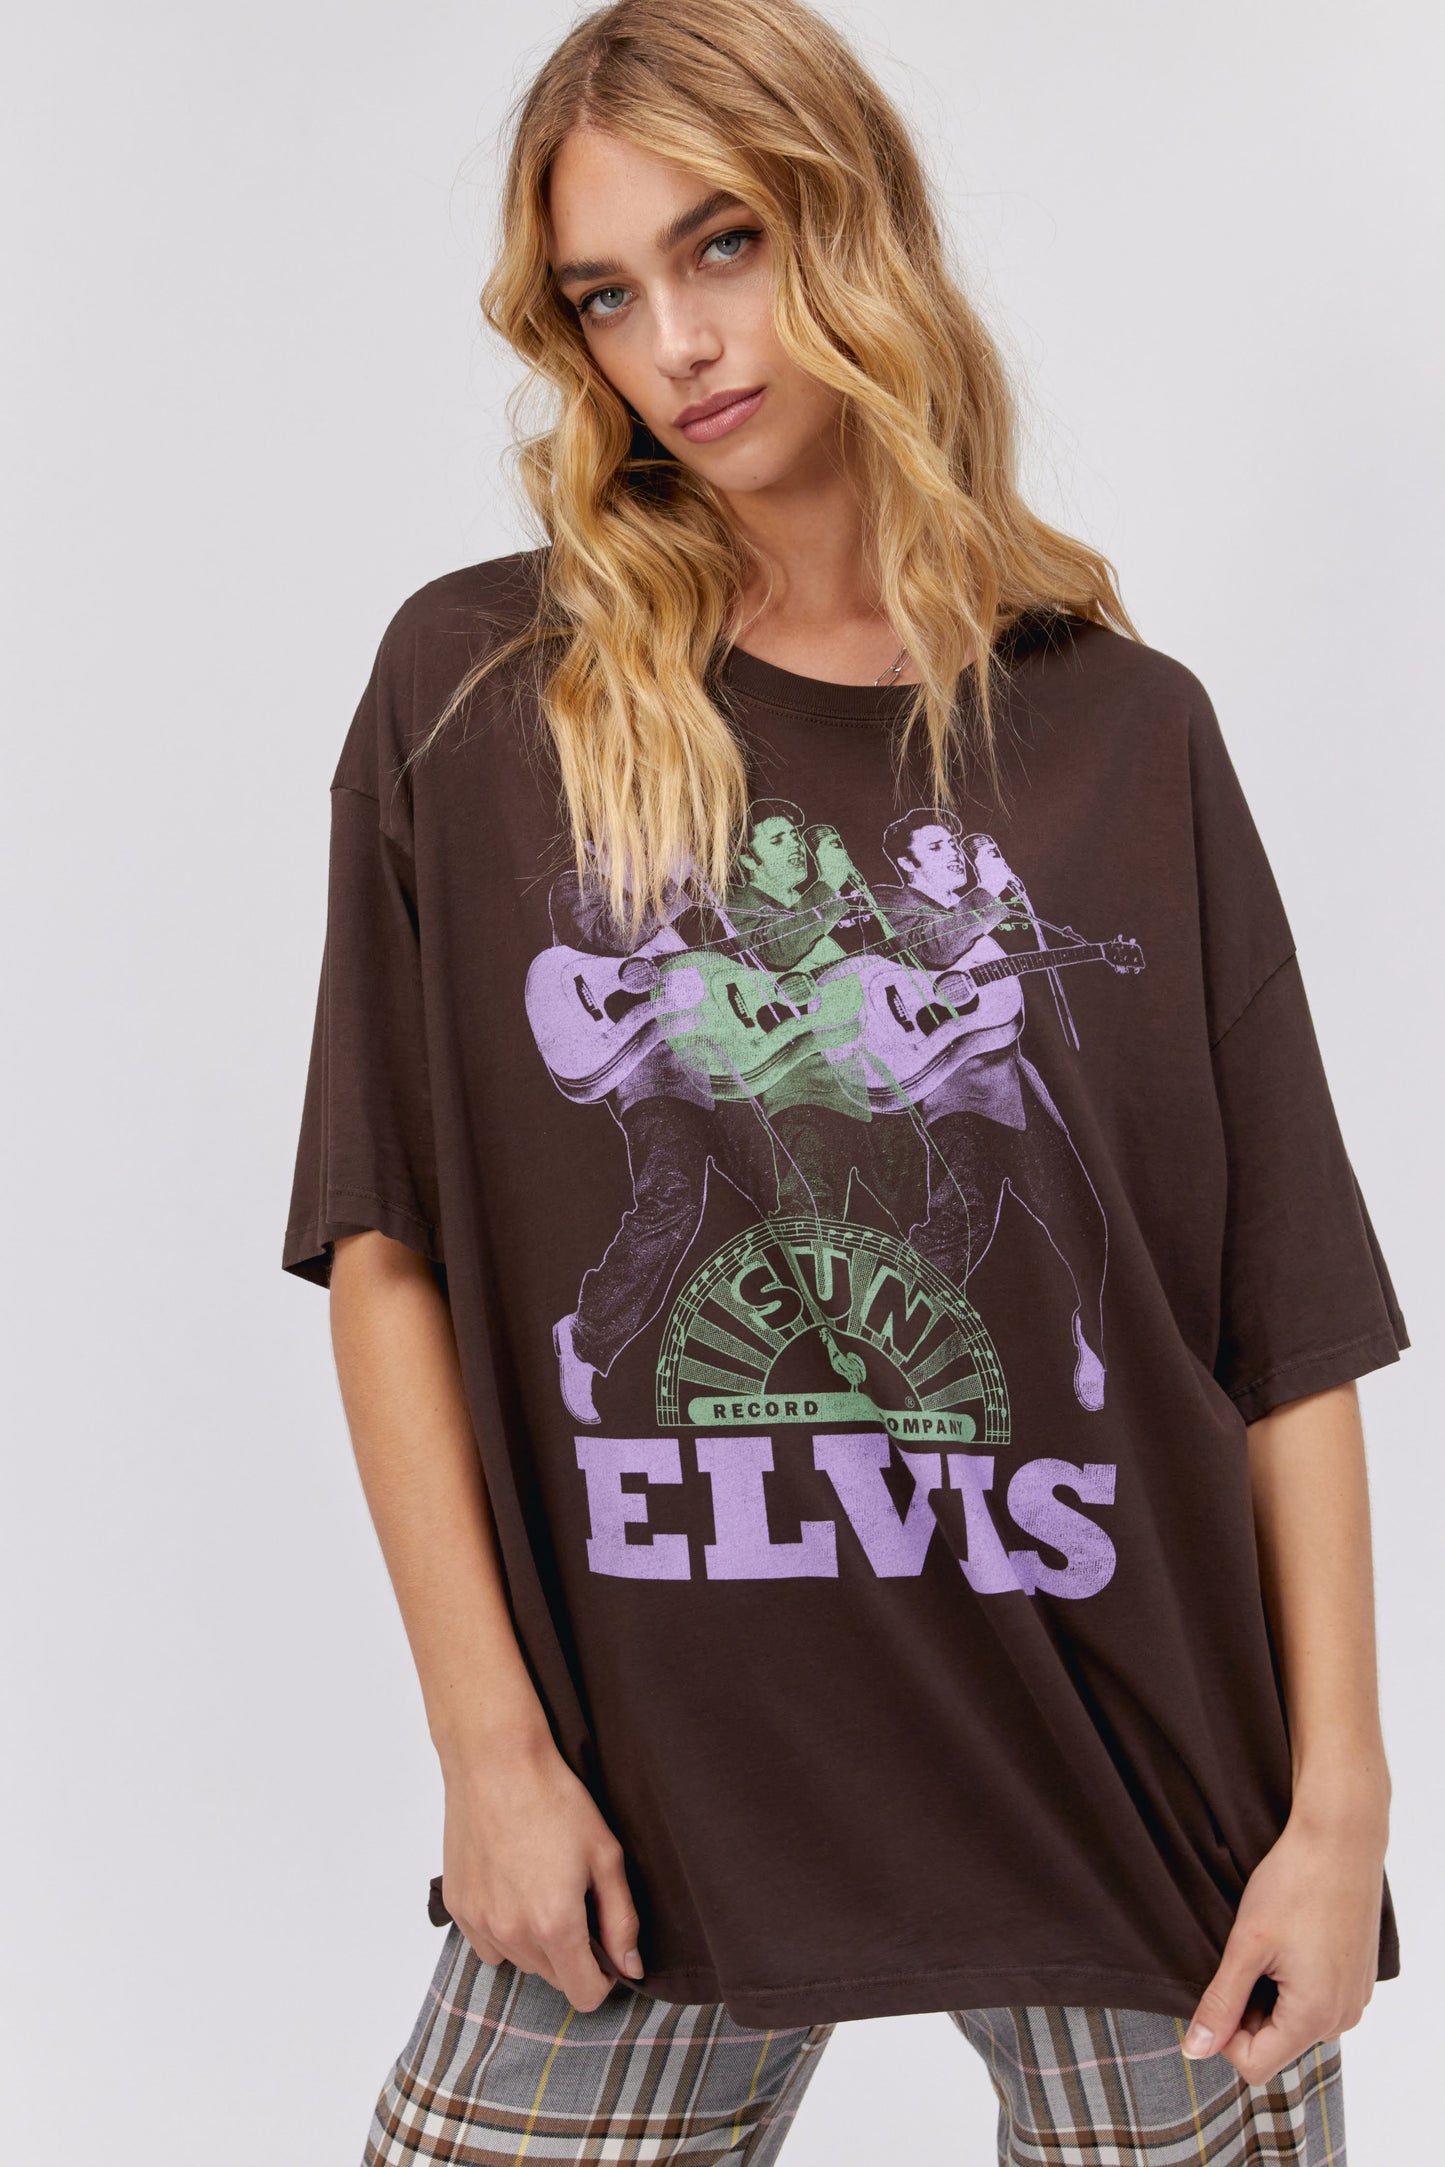 A blonde-haired model featuring a brown tee stamped with the legendary artist's name and his iconic portrait in green and purple inks.